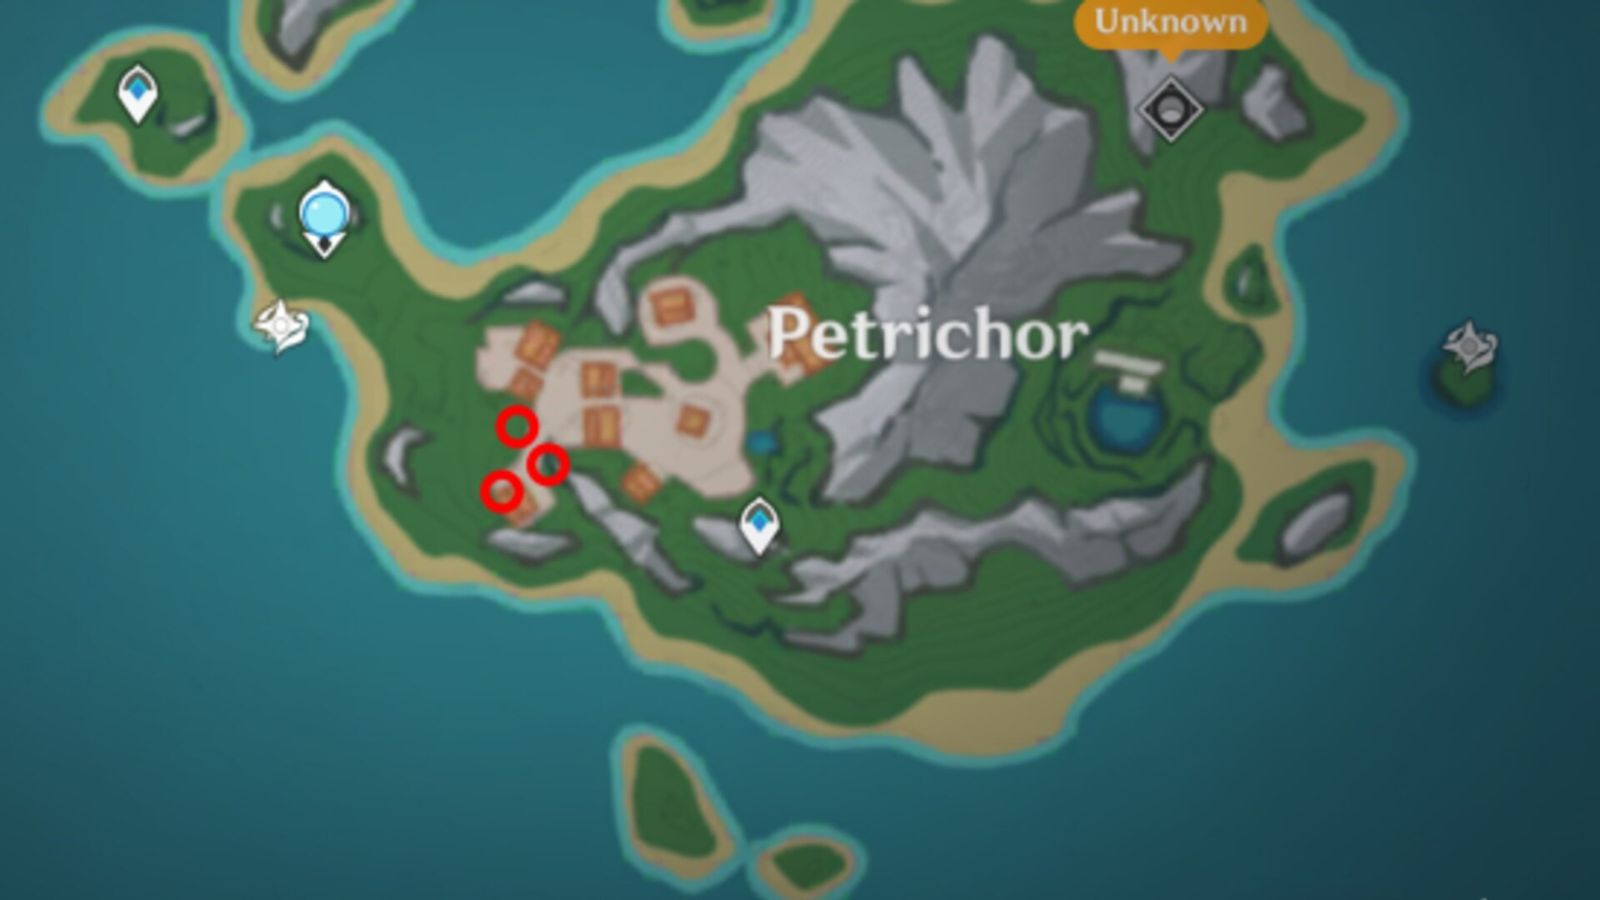 A screenshot of the Petrichor map with the three Ridiculously Common Branch locations marked by red circles.